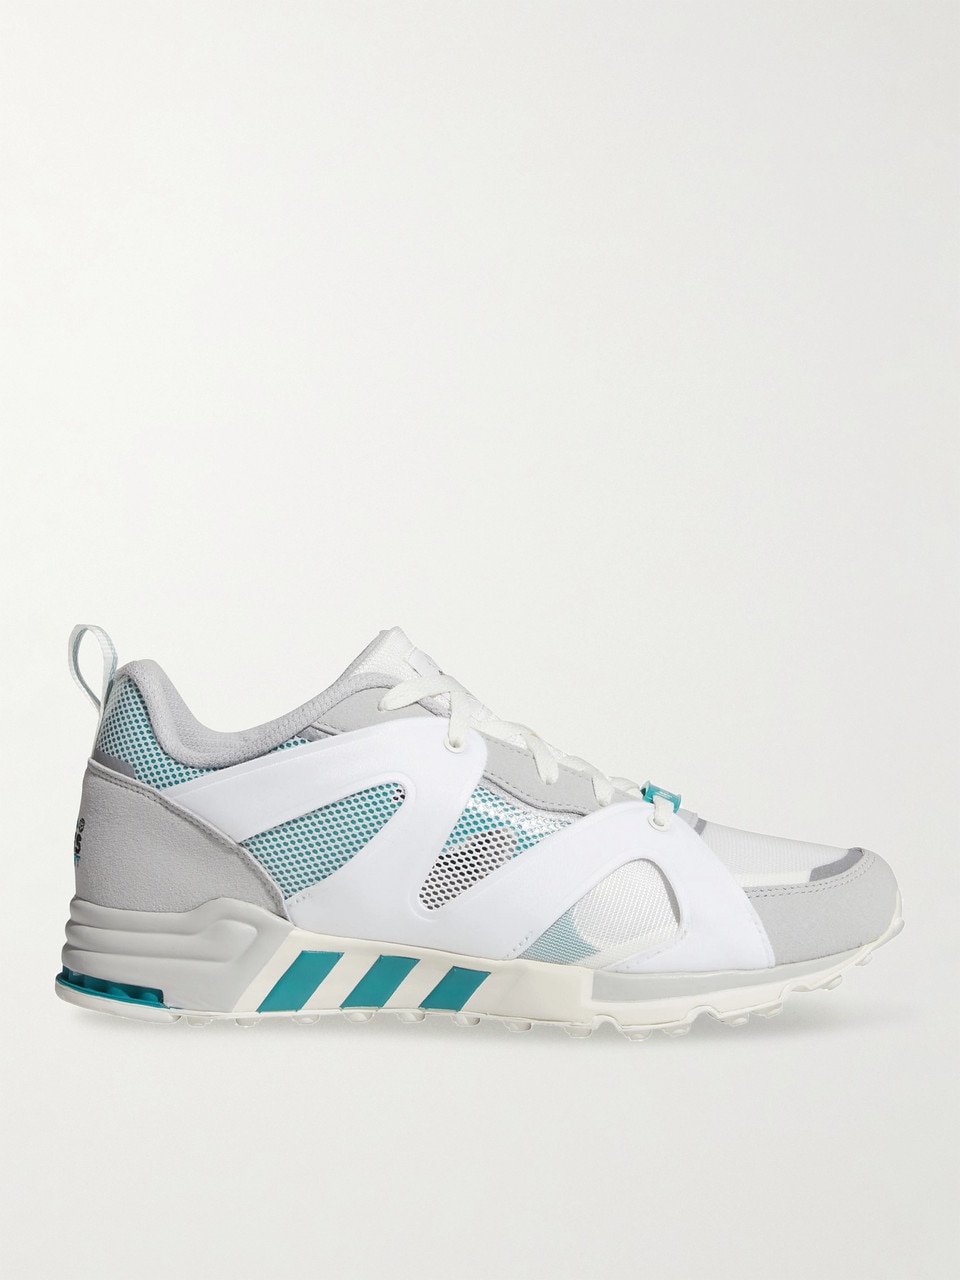 Fashion: Sneaker Icon: Celebrating 30 Years Of Adidas EQT | The Journal |  MR PORTER